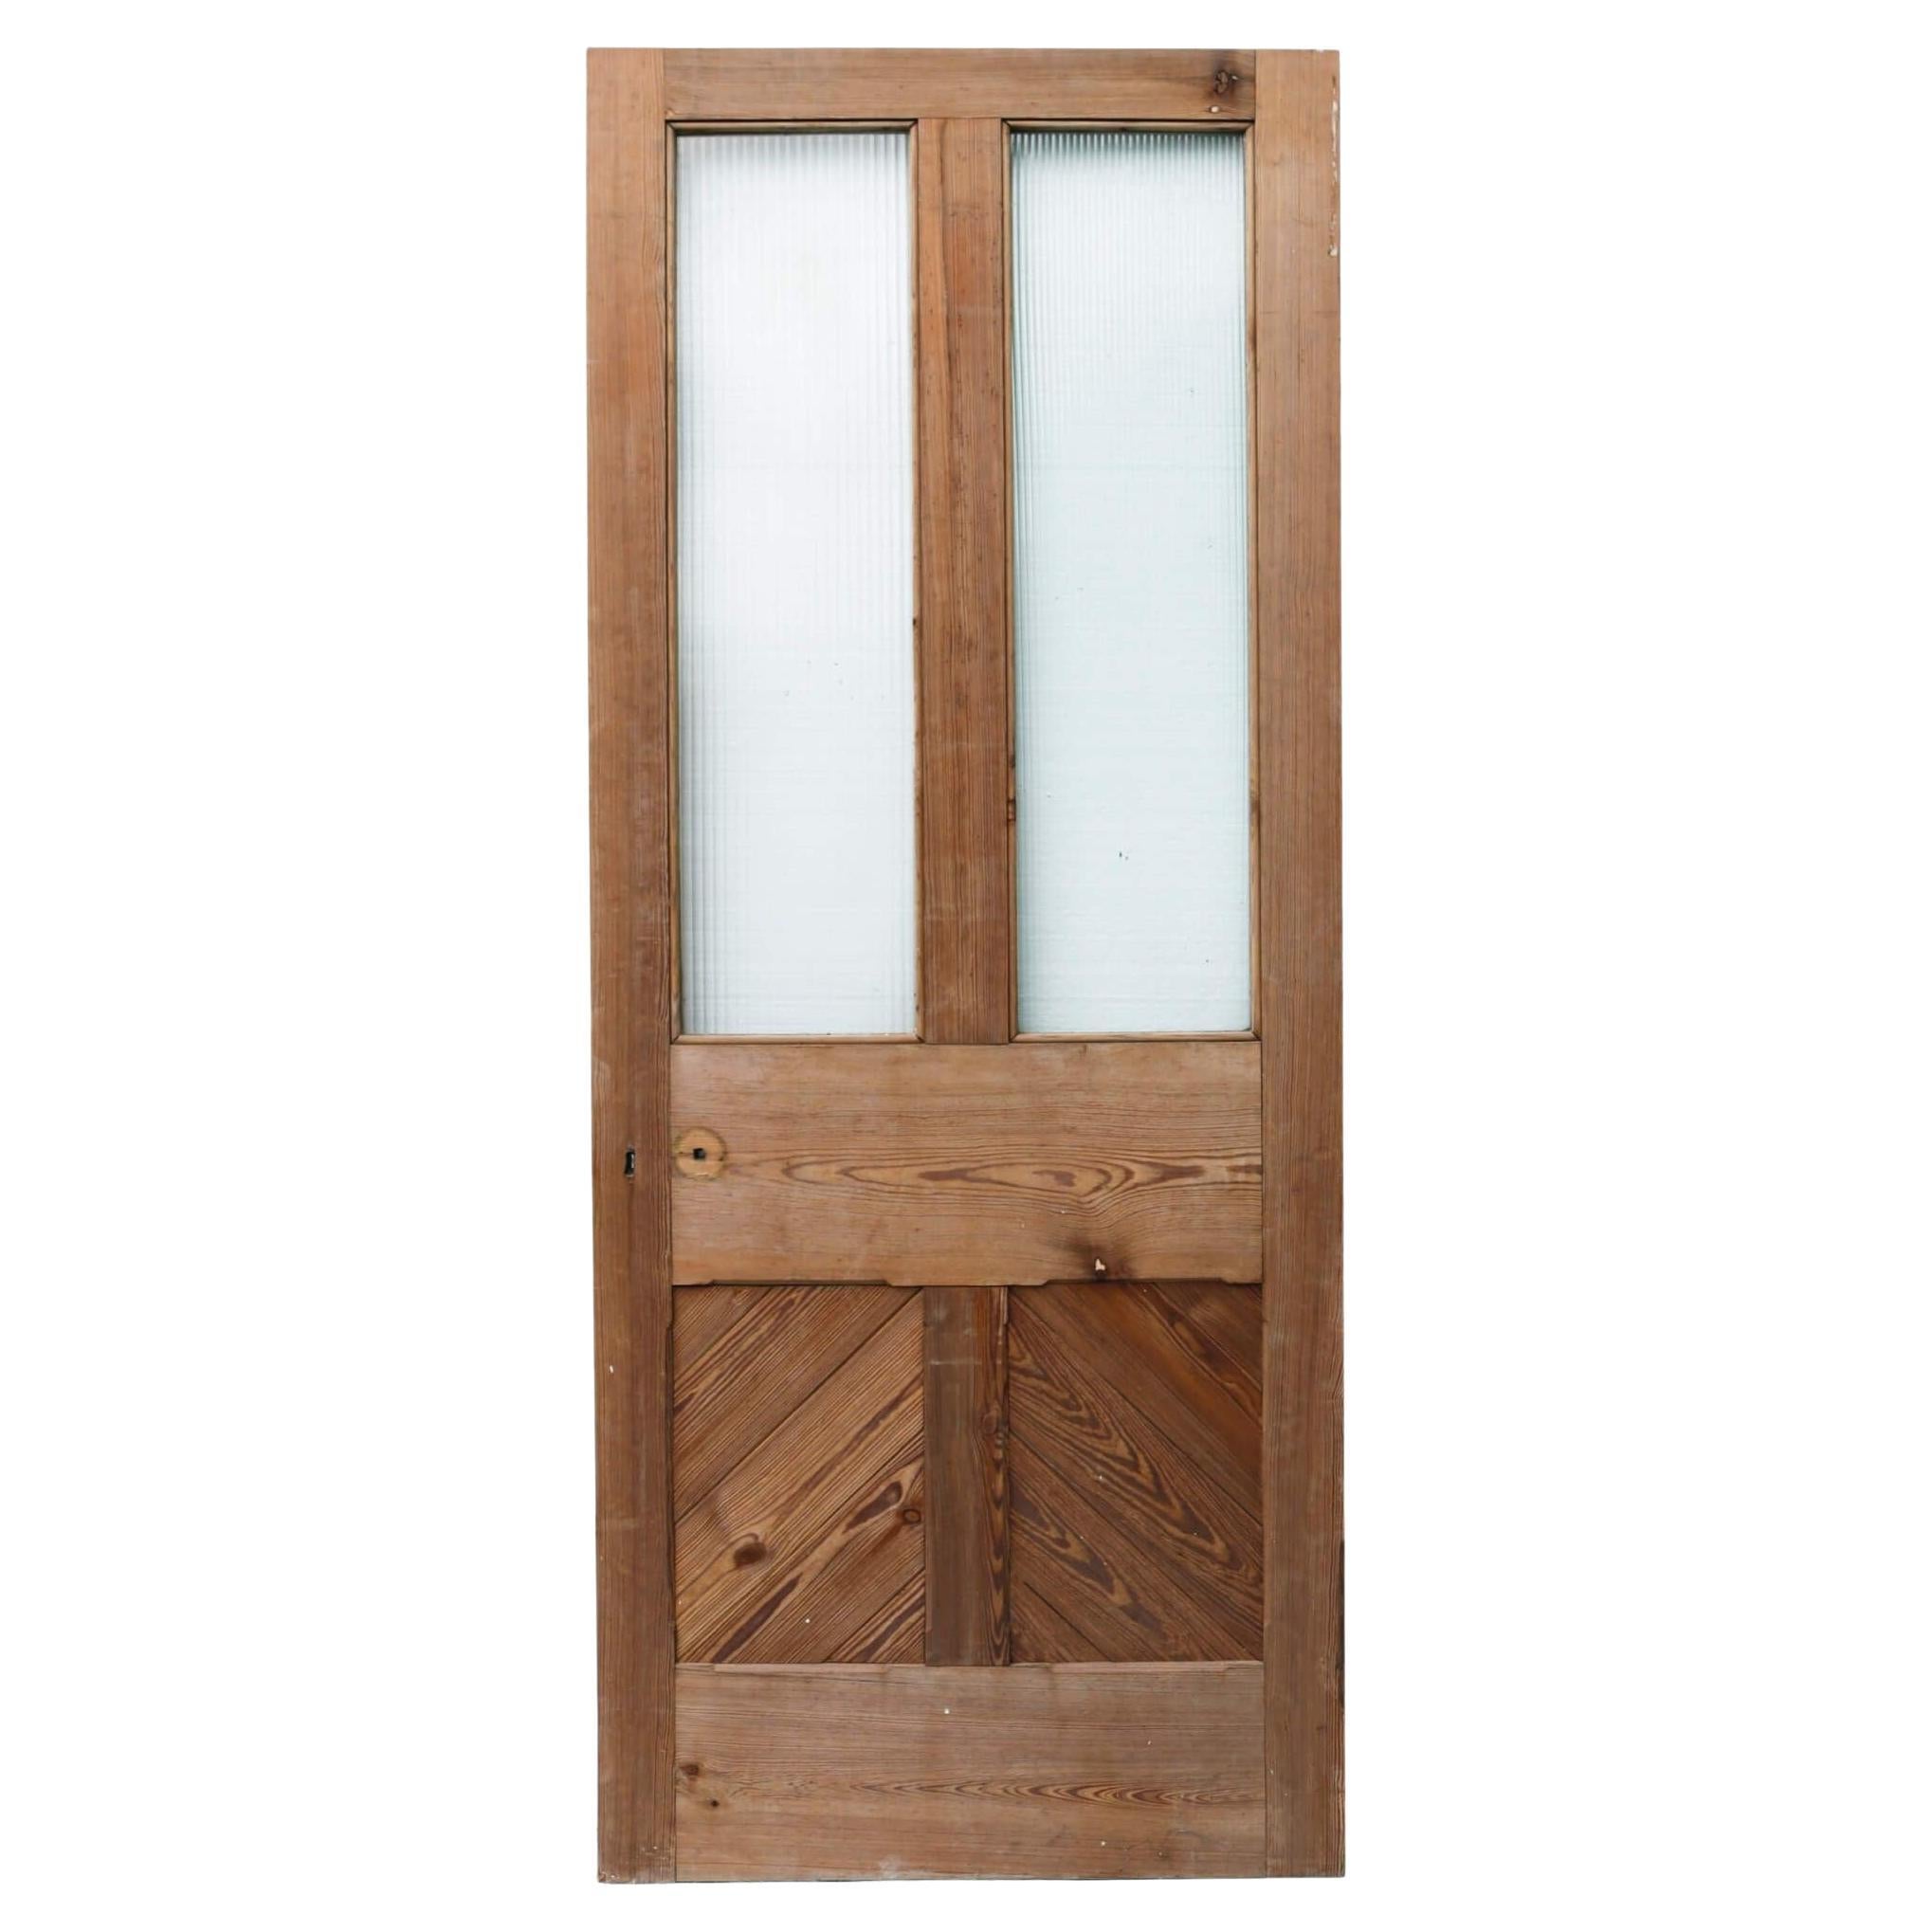 Reclaimed Half Glazed Pitch Pine Internal Door with Reeded Glass For Sale